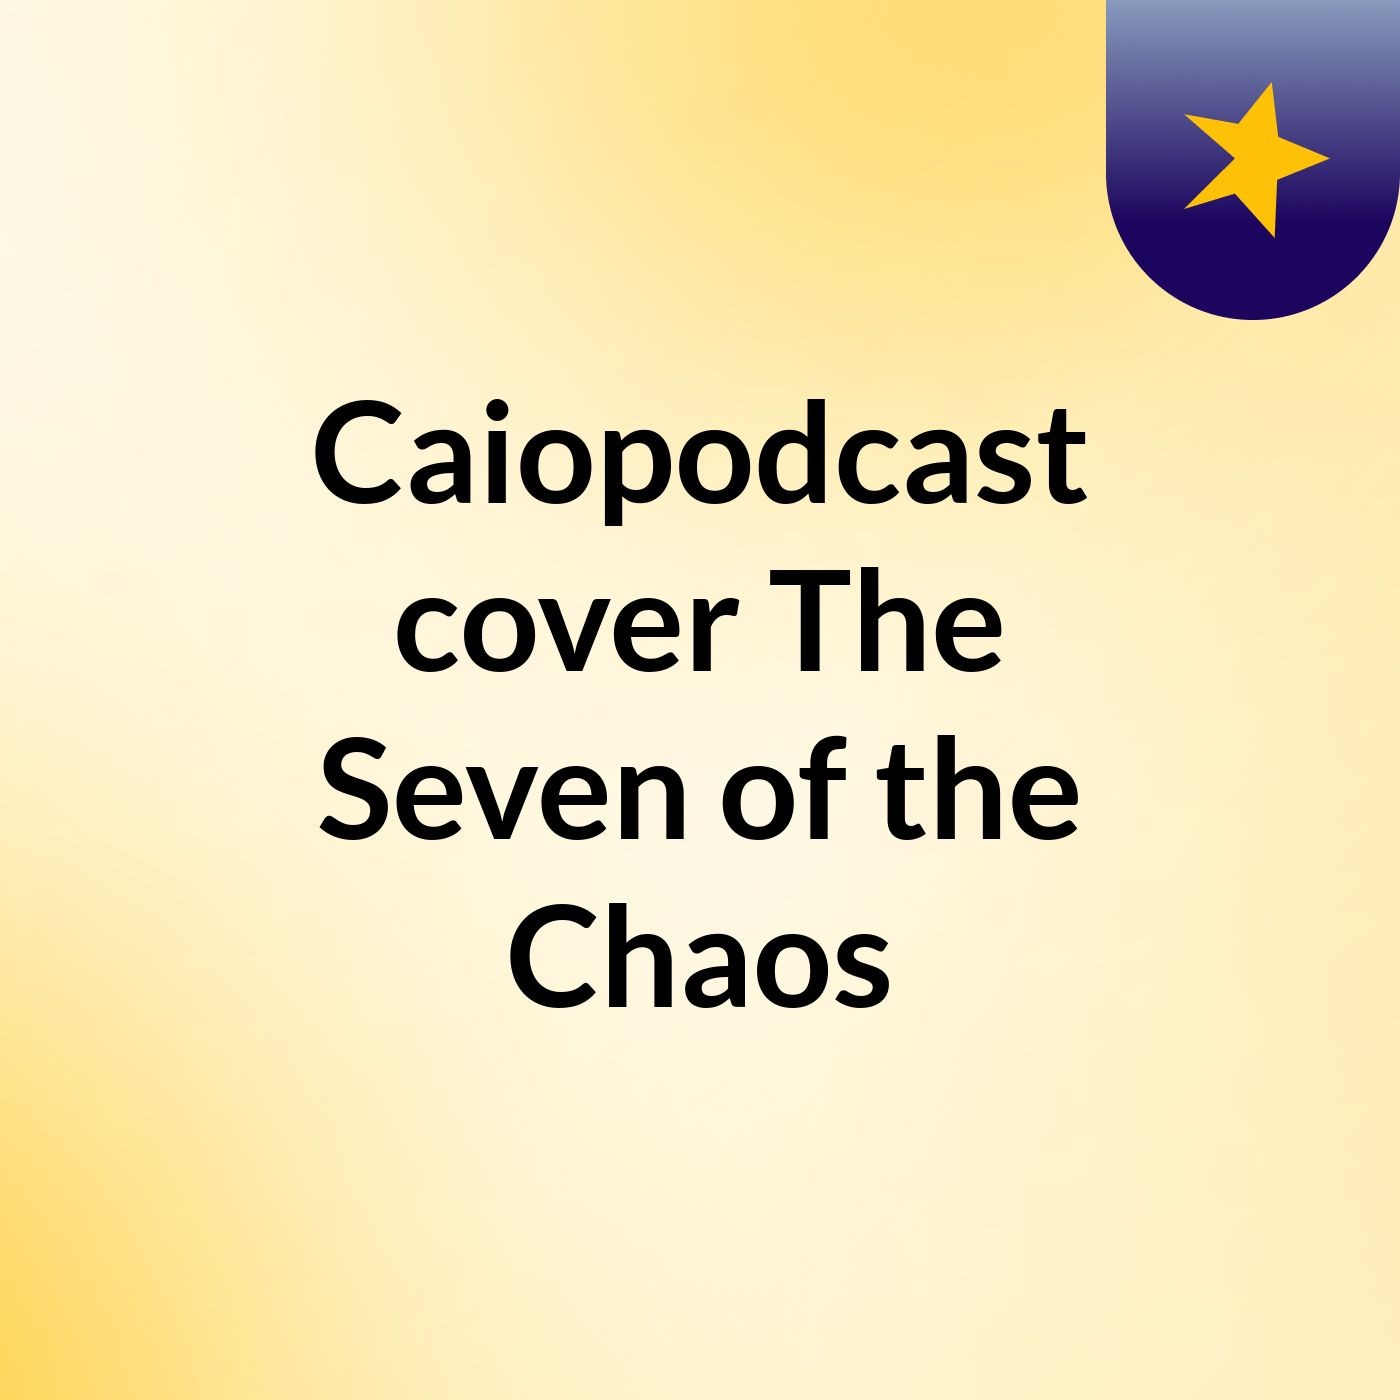 Caiopodcast cover The Seven of the Chaos